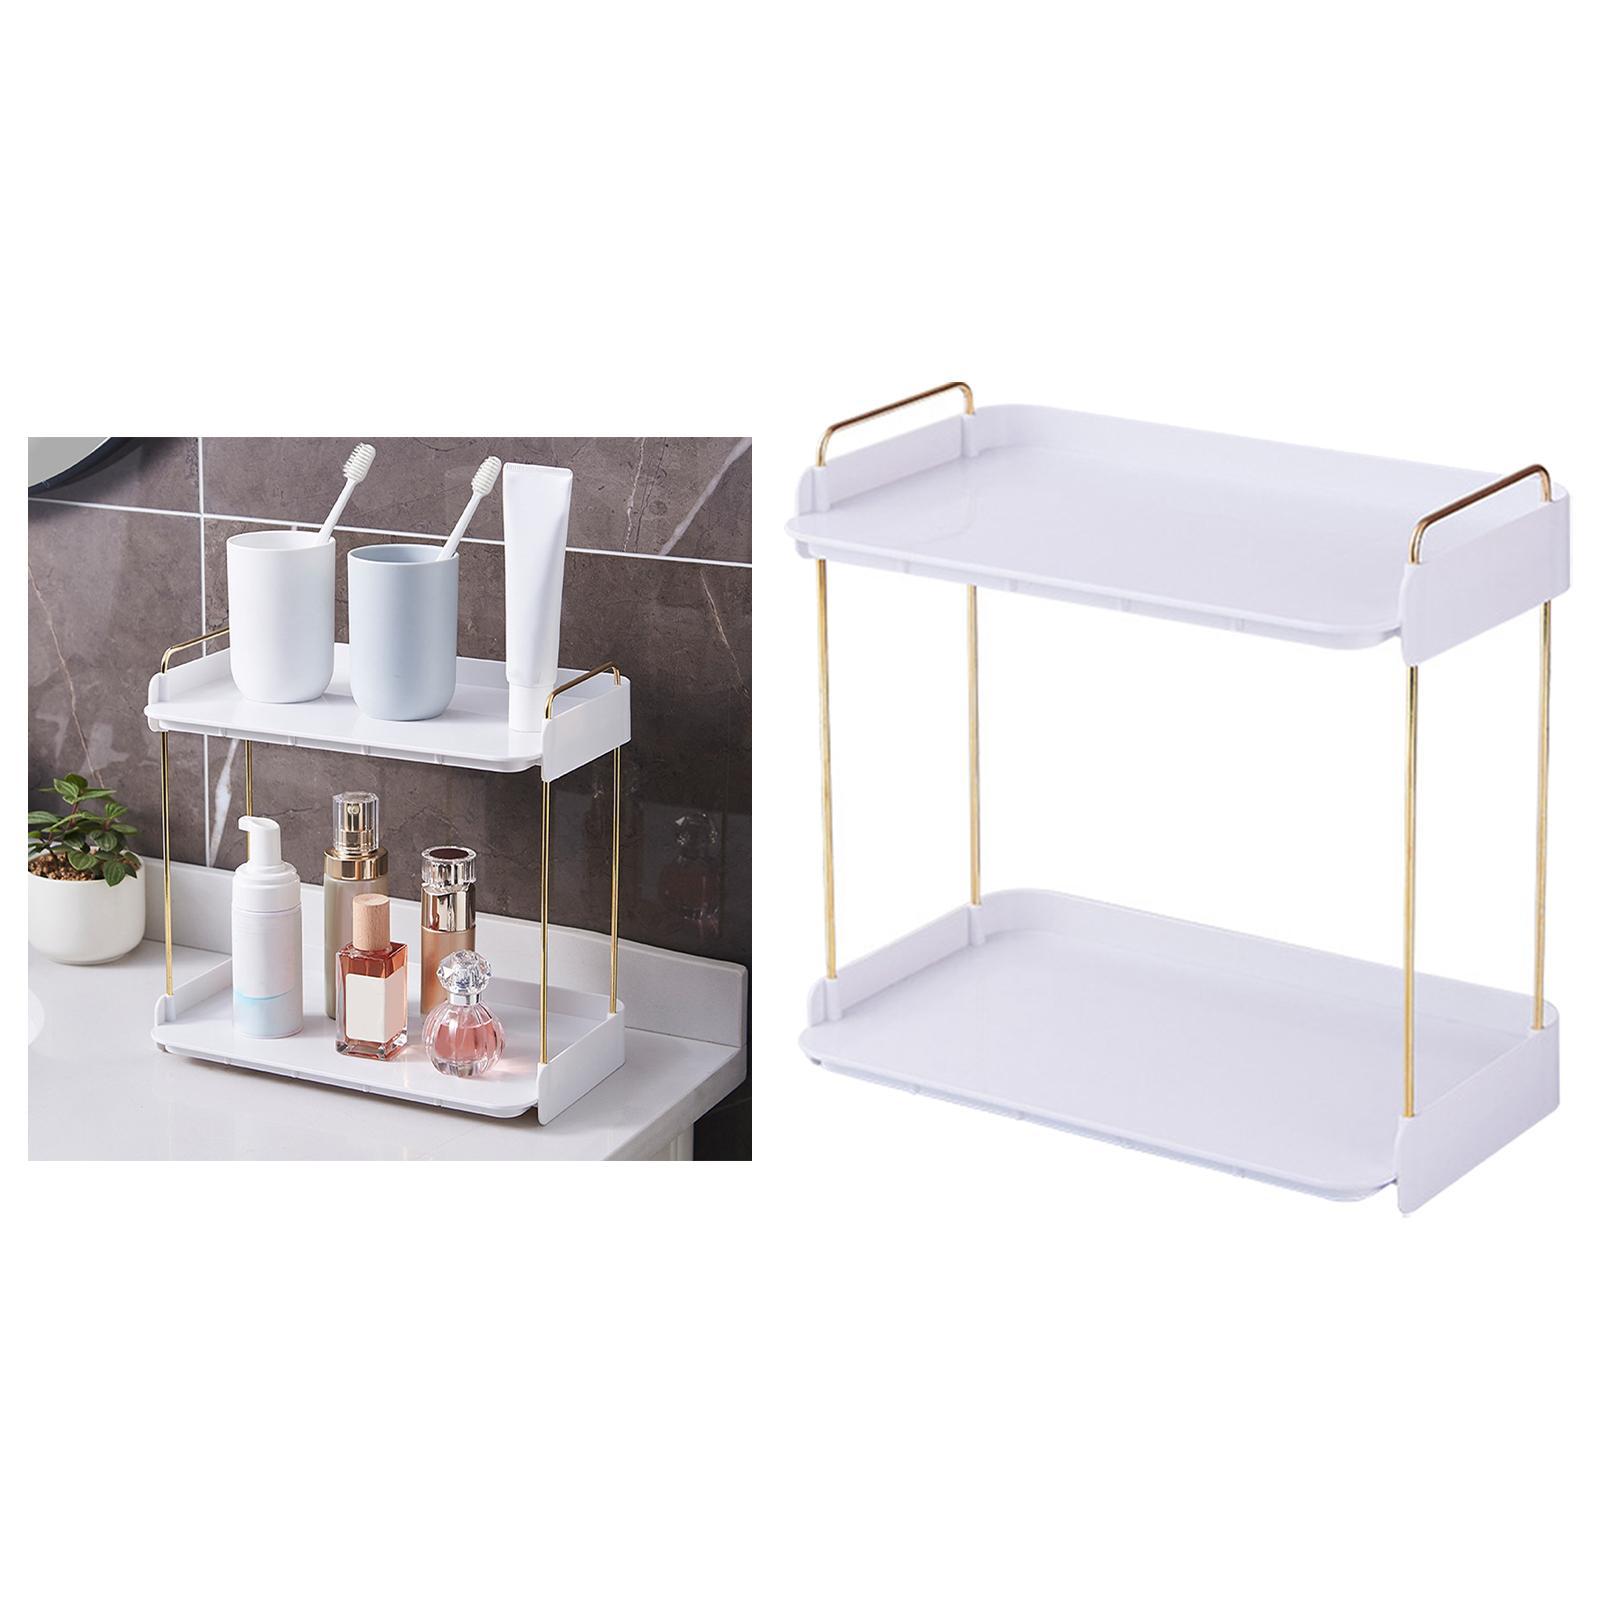 cosmetic stand makeup shelves shower kitchen 2 Layers white